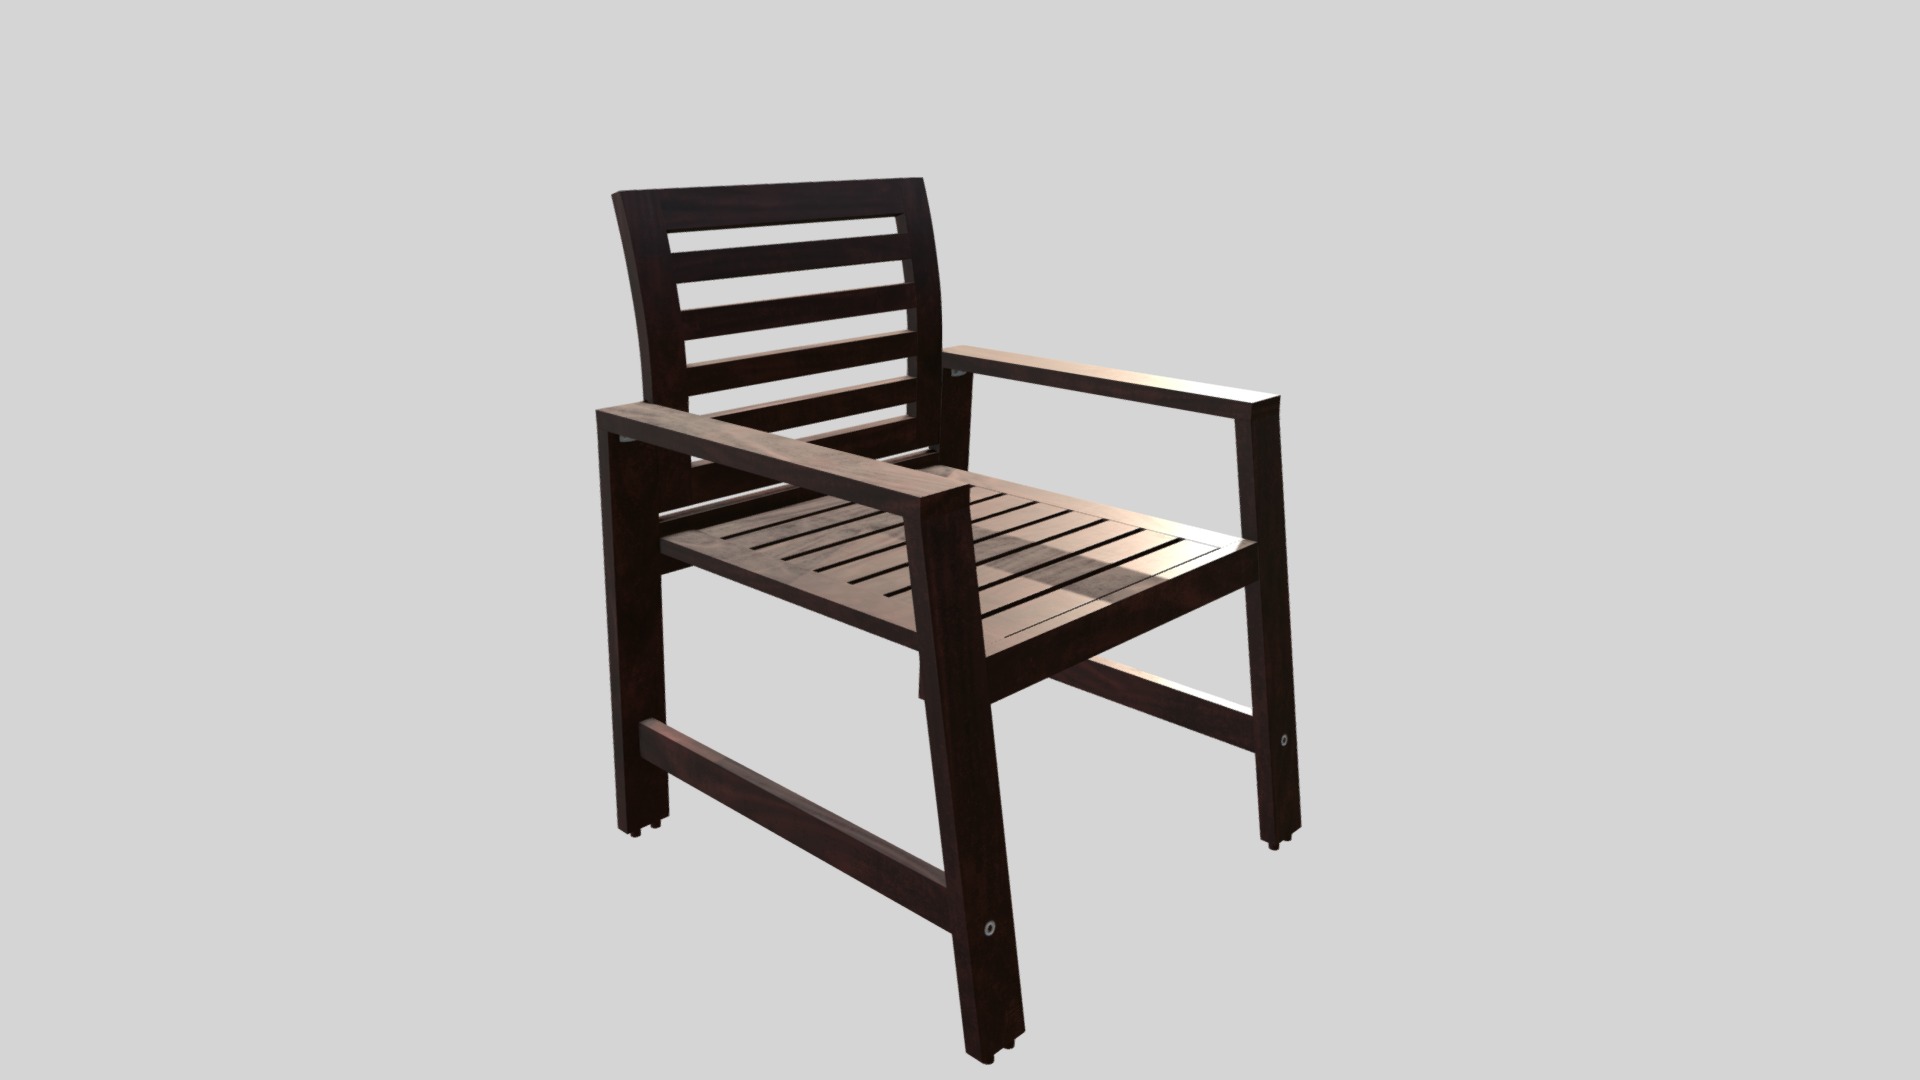 3D model Chairs Outdoor Ikea Applaro Chair - This is a 3D model of the Chairs Outdoor Ikea Applaro Chair. The 3D model is about a wooden chair with a white background.